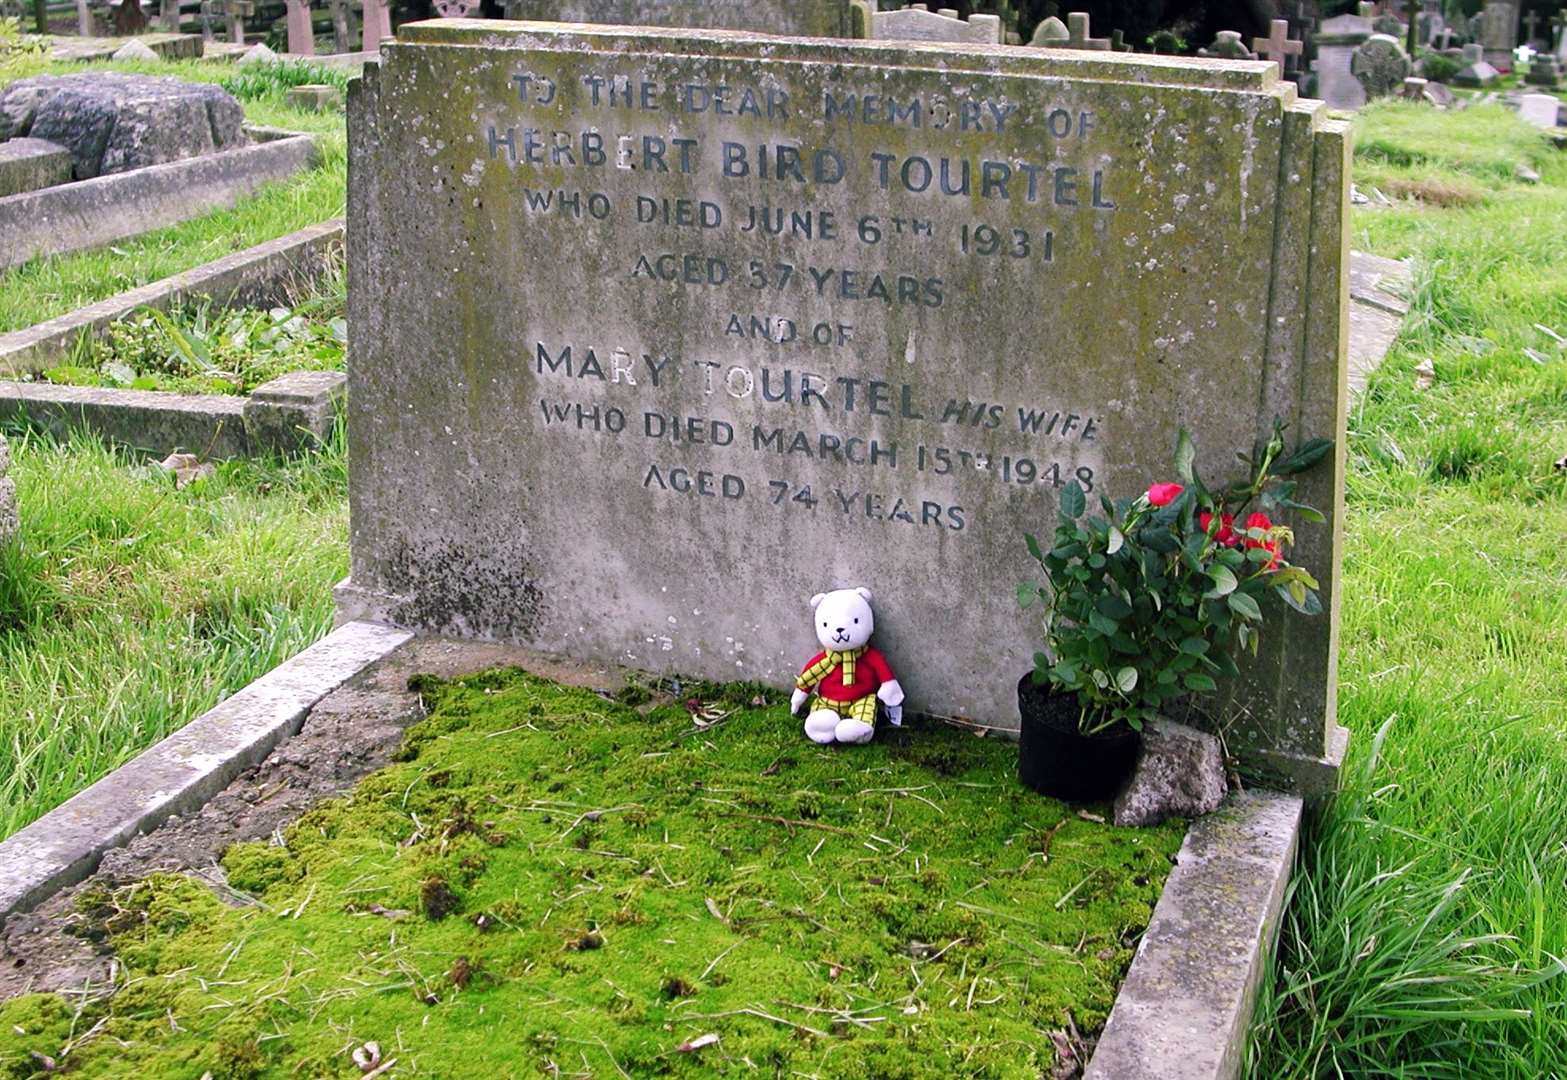 The grave of Mary Tourtel and her husband, Herbert